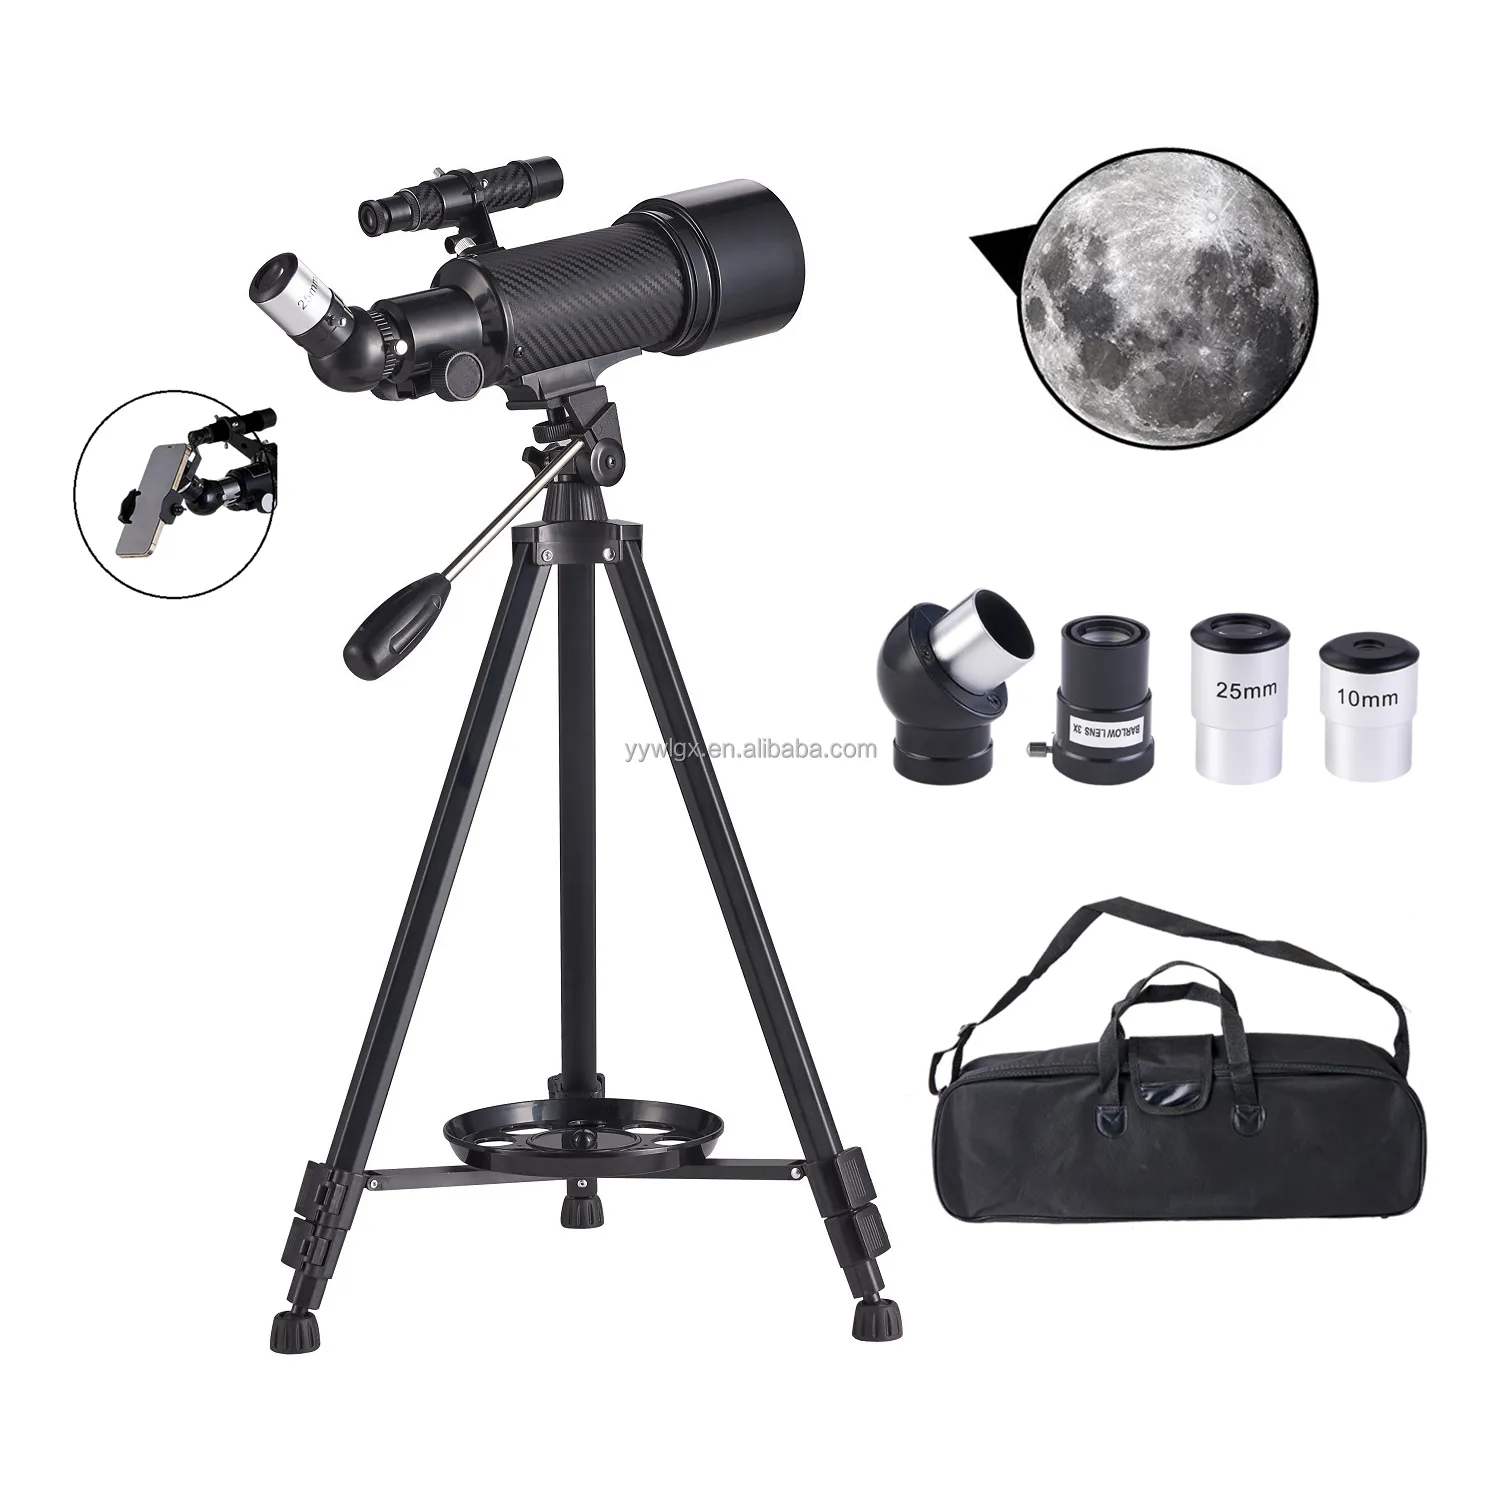 F40070m Outdoors Spotting Scope Professional Smartphone Refractor 70mm Aperture 400mm Focal Length Astronomical Telescope